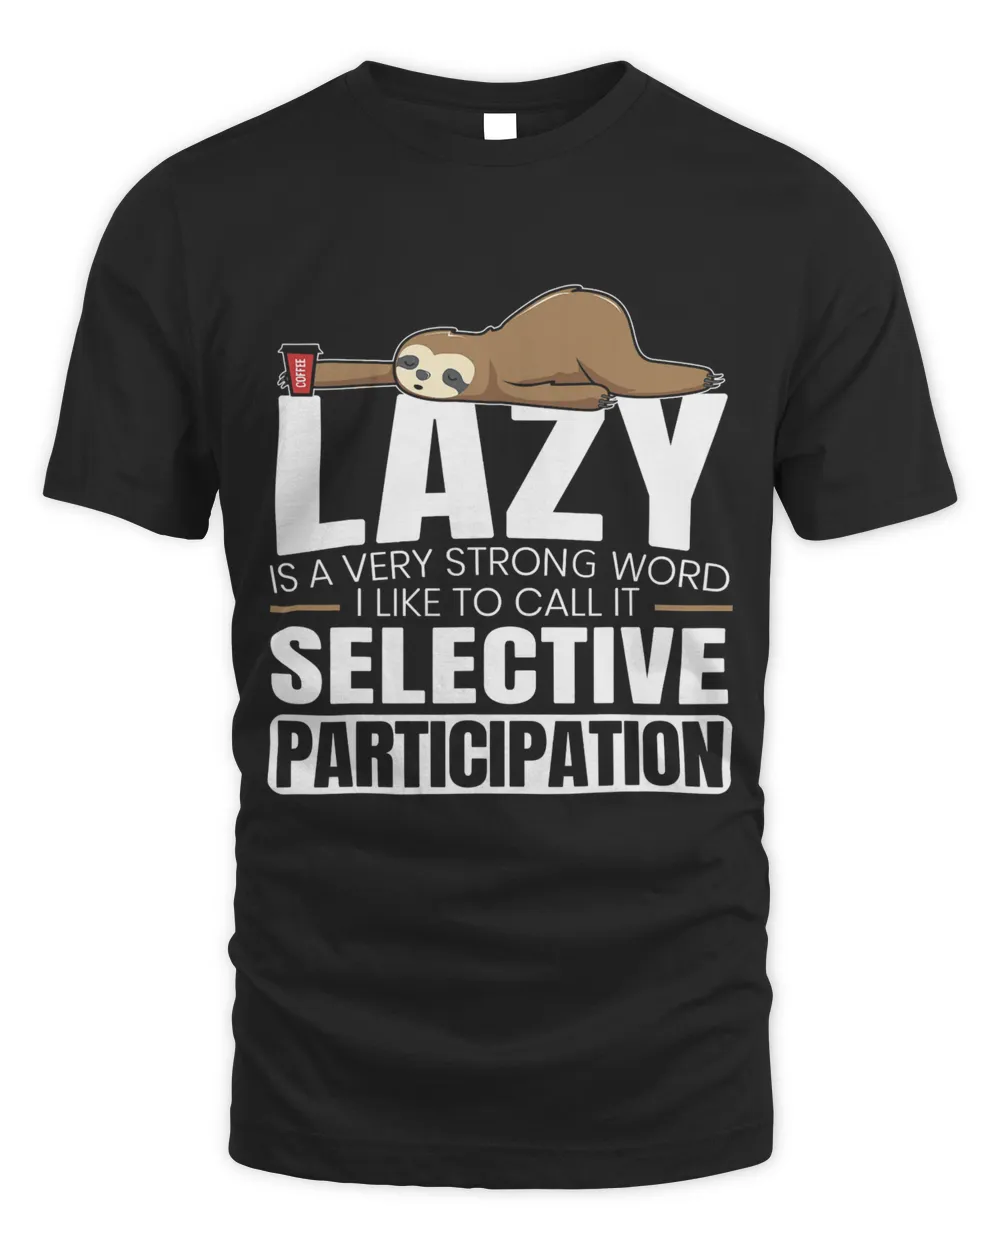 Lazy Is a Very Strong Word I Call It Selective Participation T-Shirt